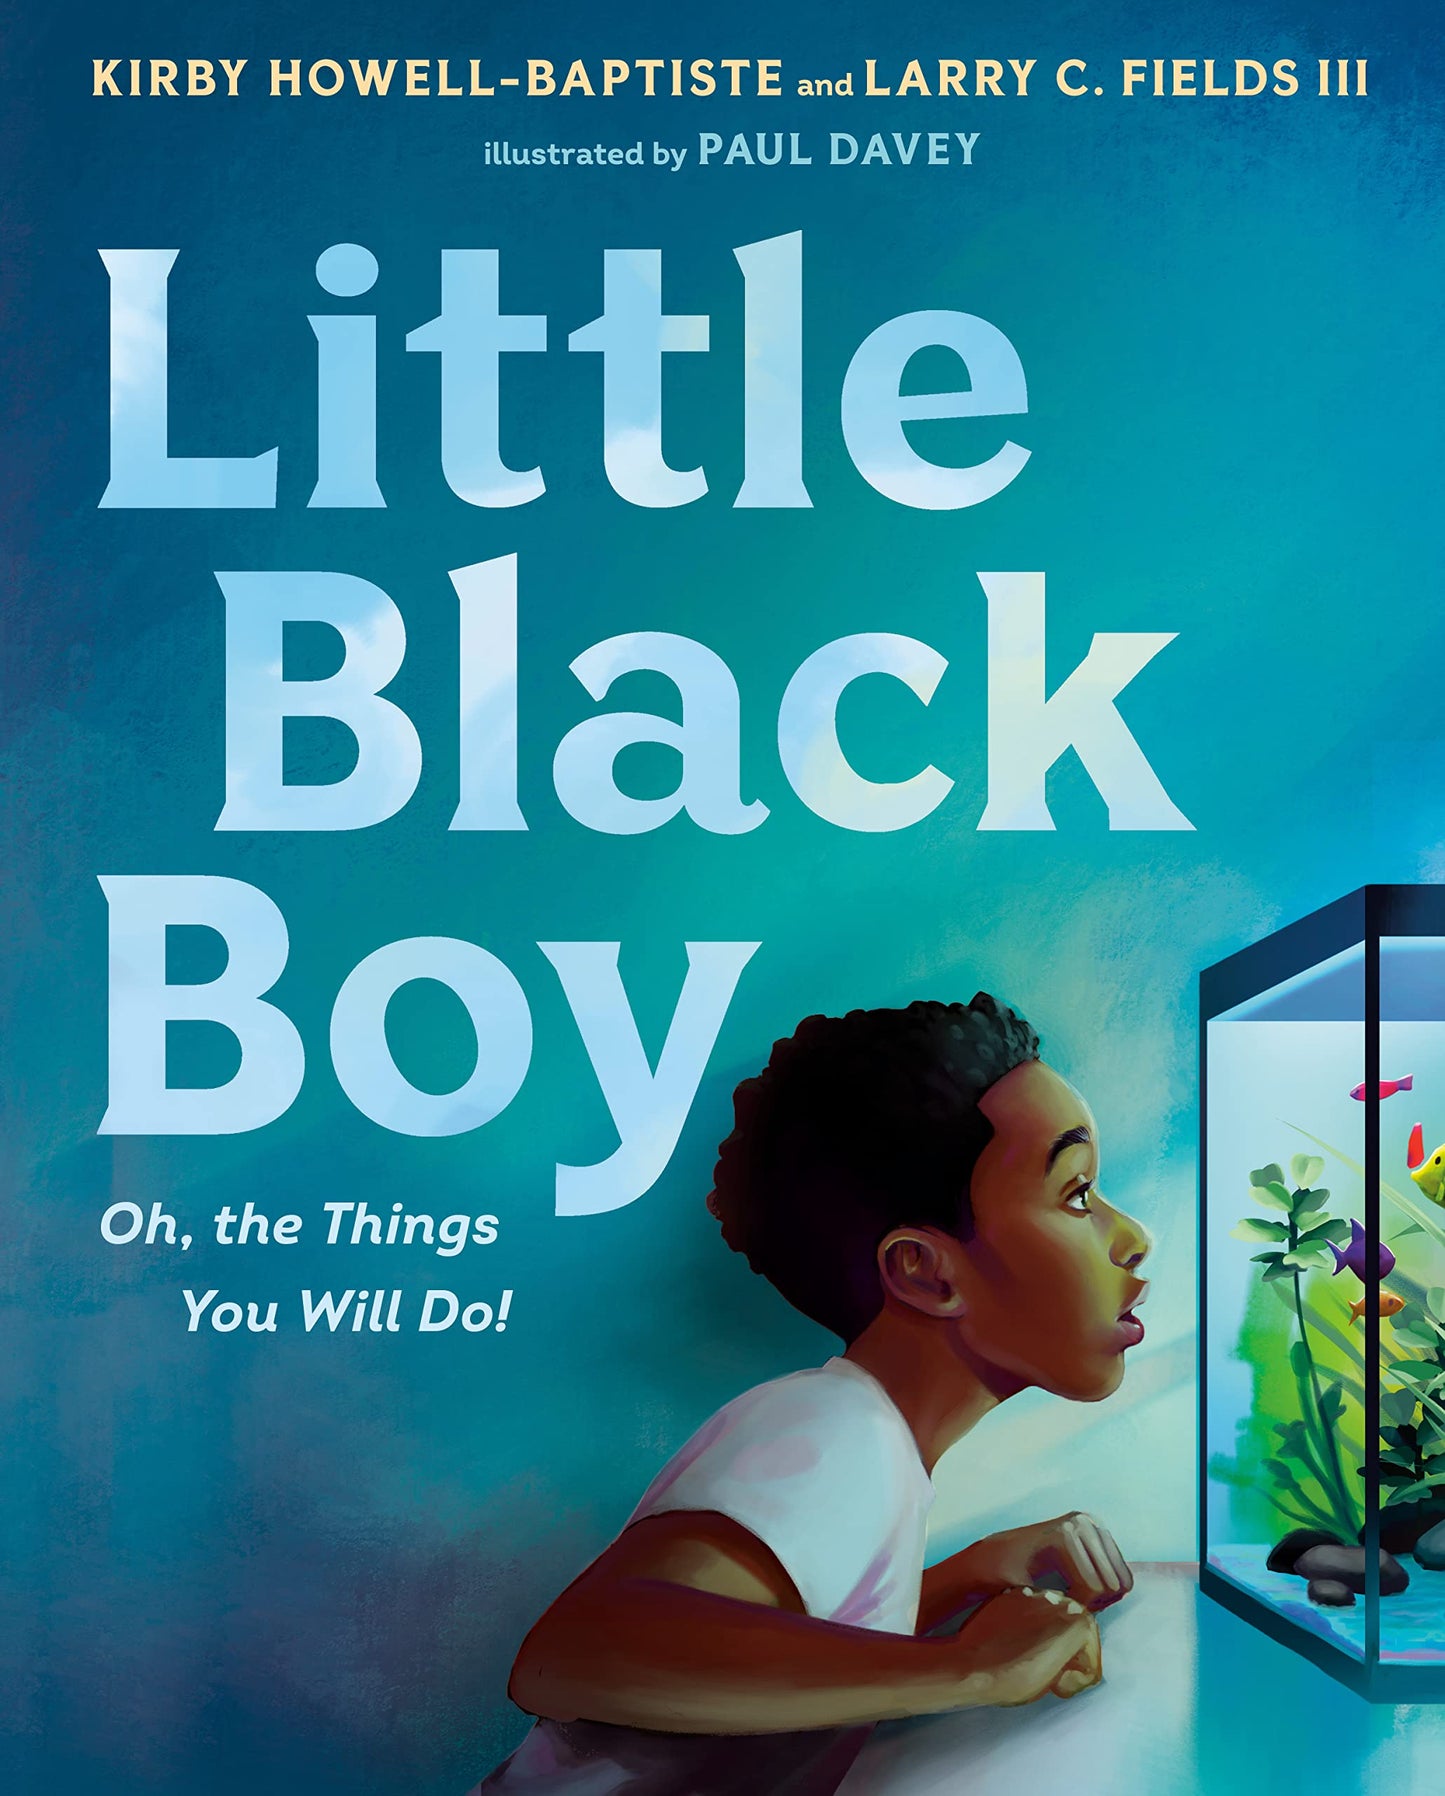 Little Black Boy // Oh, the Things You Will Do!